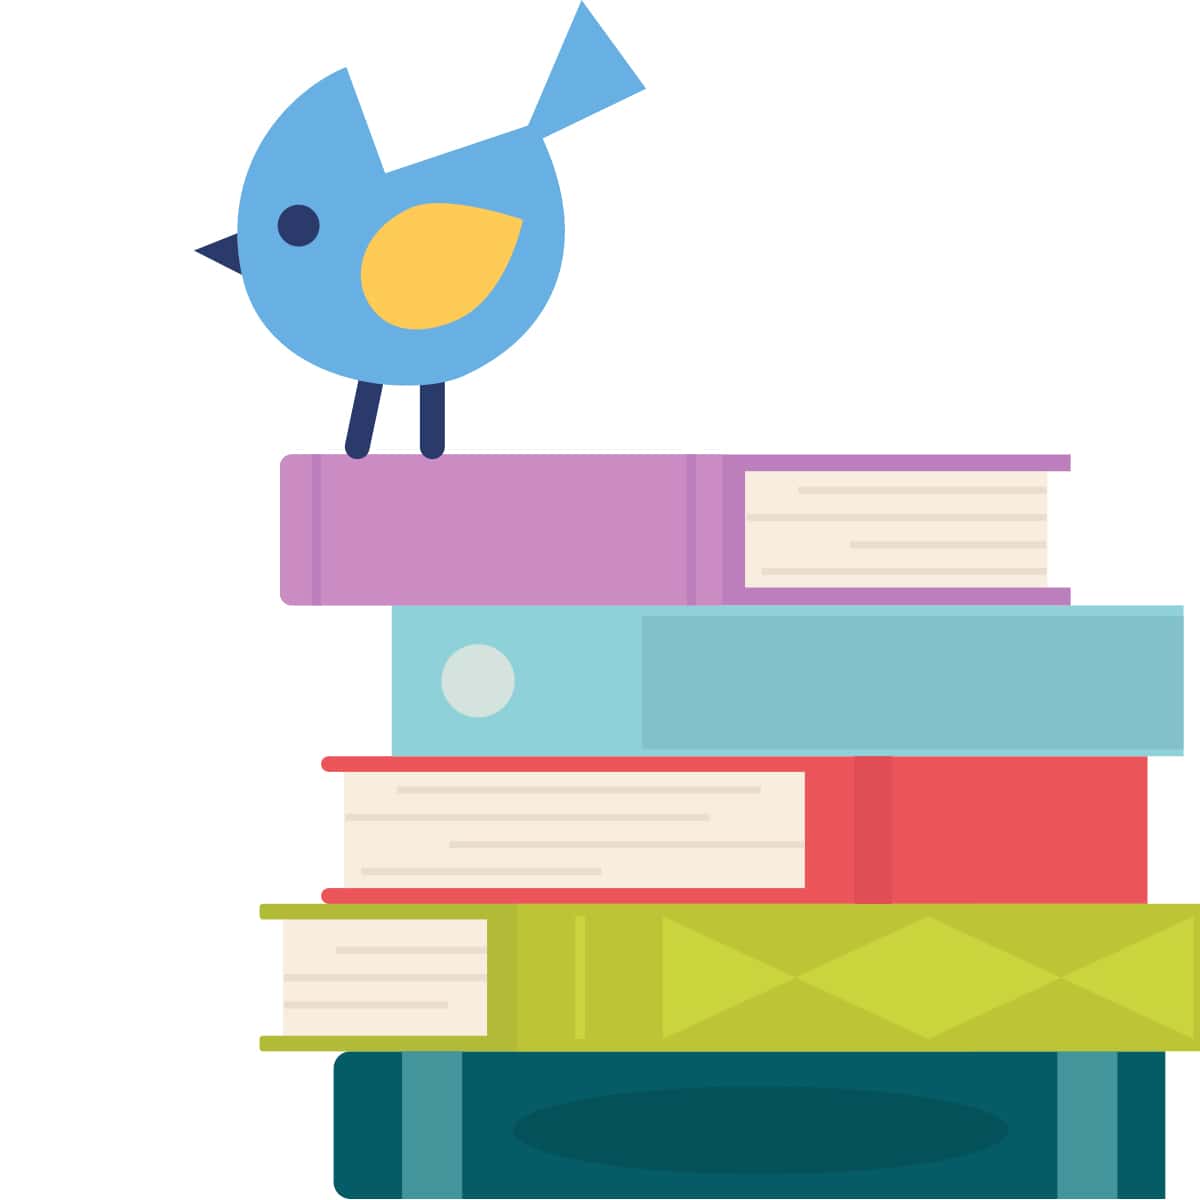 Illustrated blue bird on a stack of books.